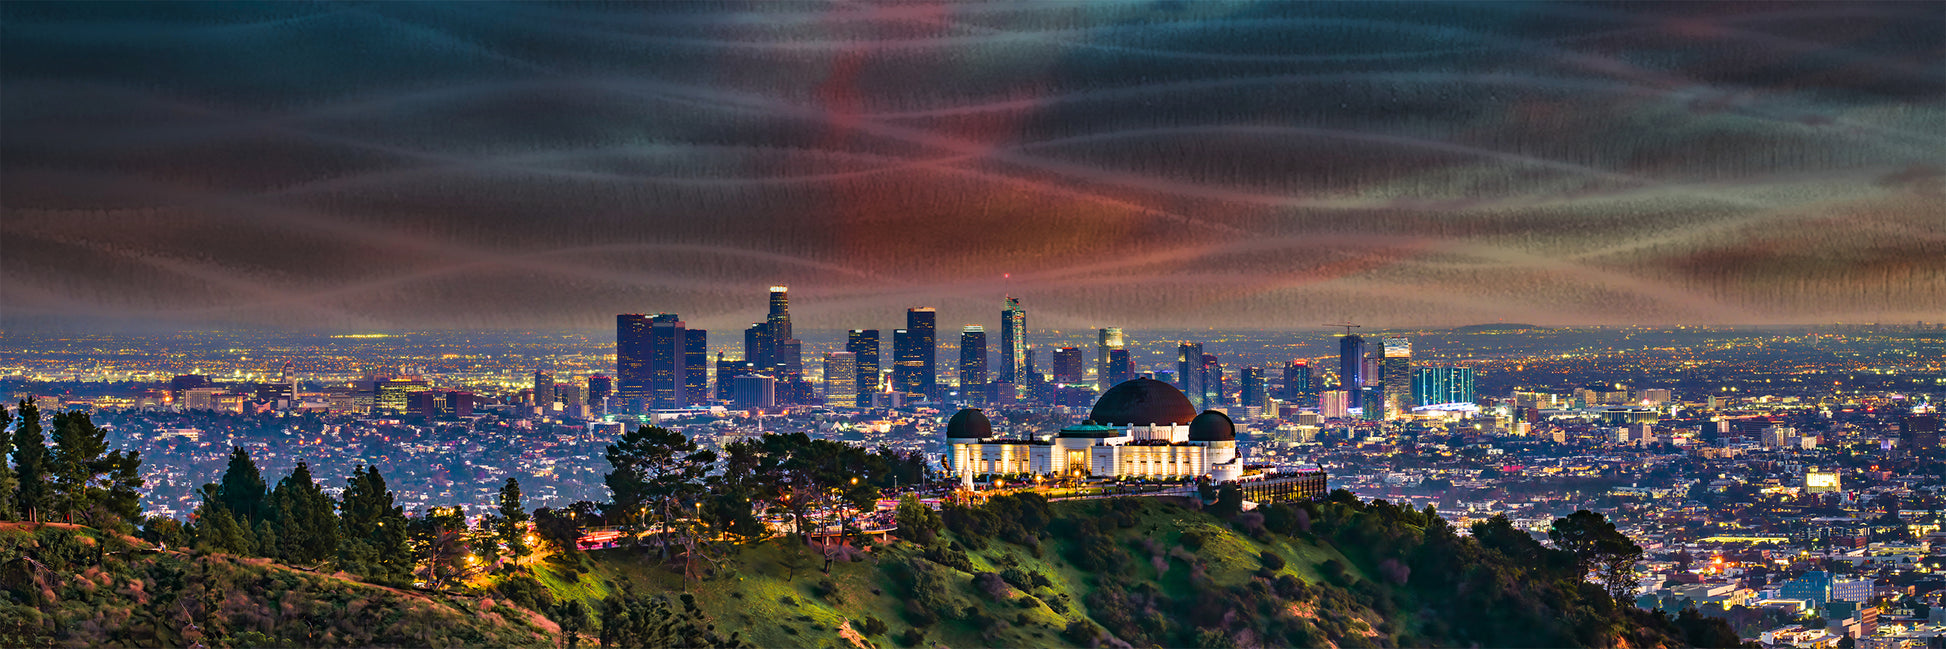 Scenery - Griffith Observatory Night - Los Angeles